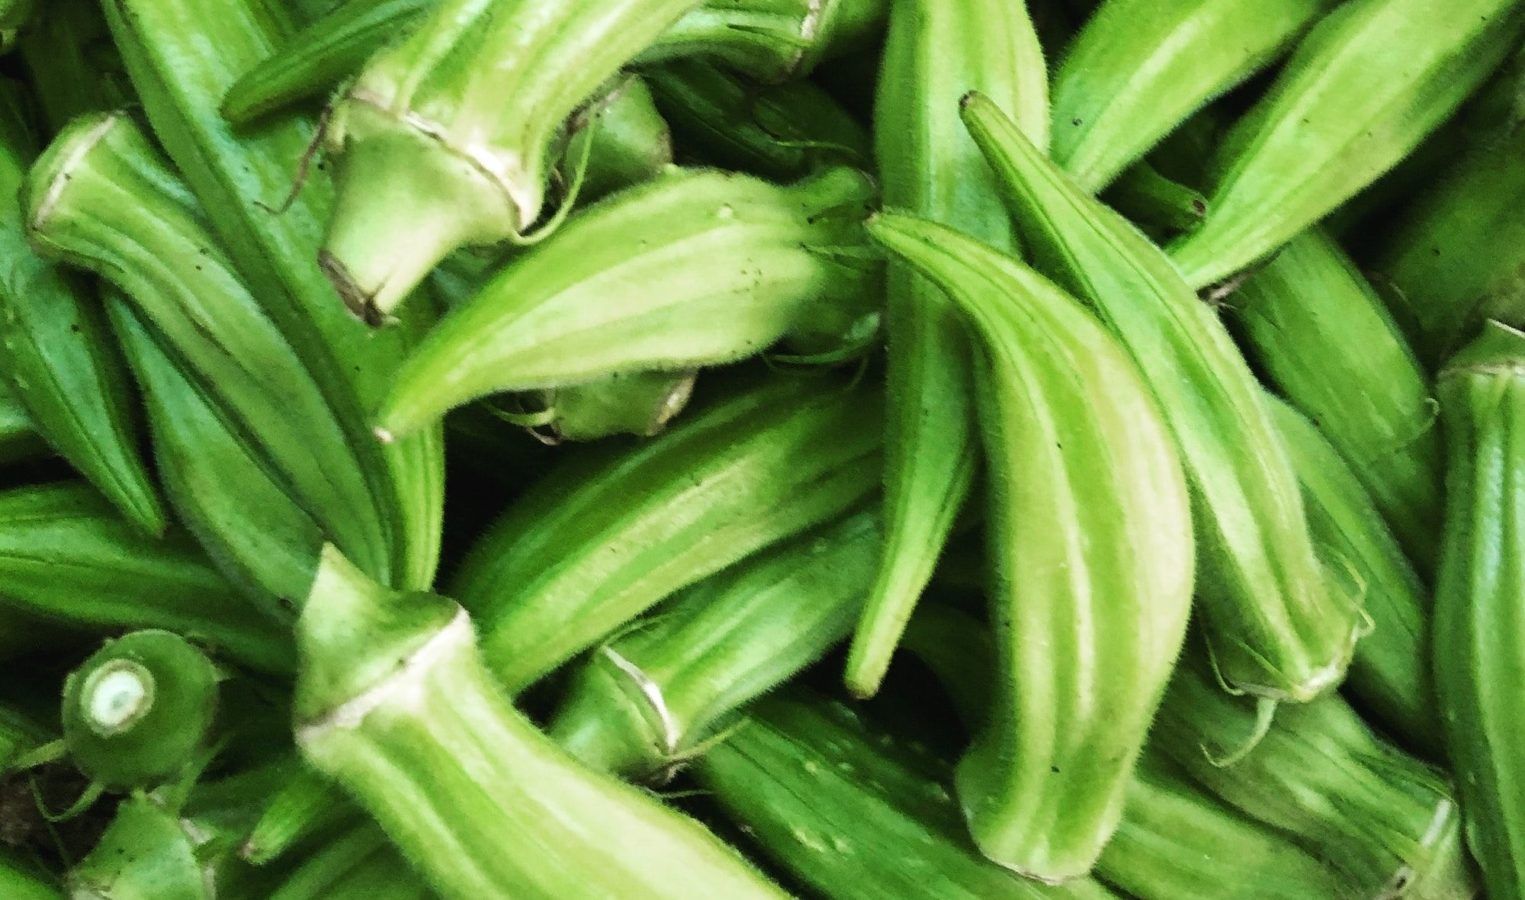 Simple yet delicious recipes to prepare okra at home